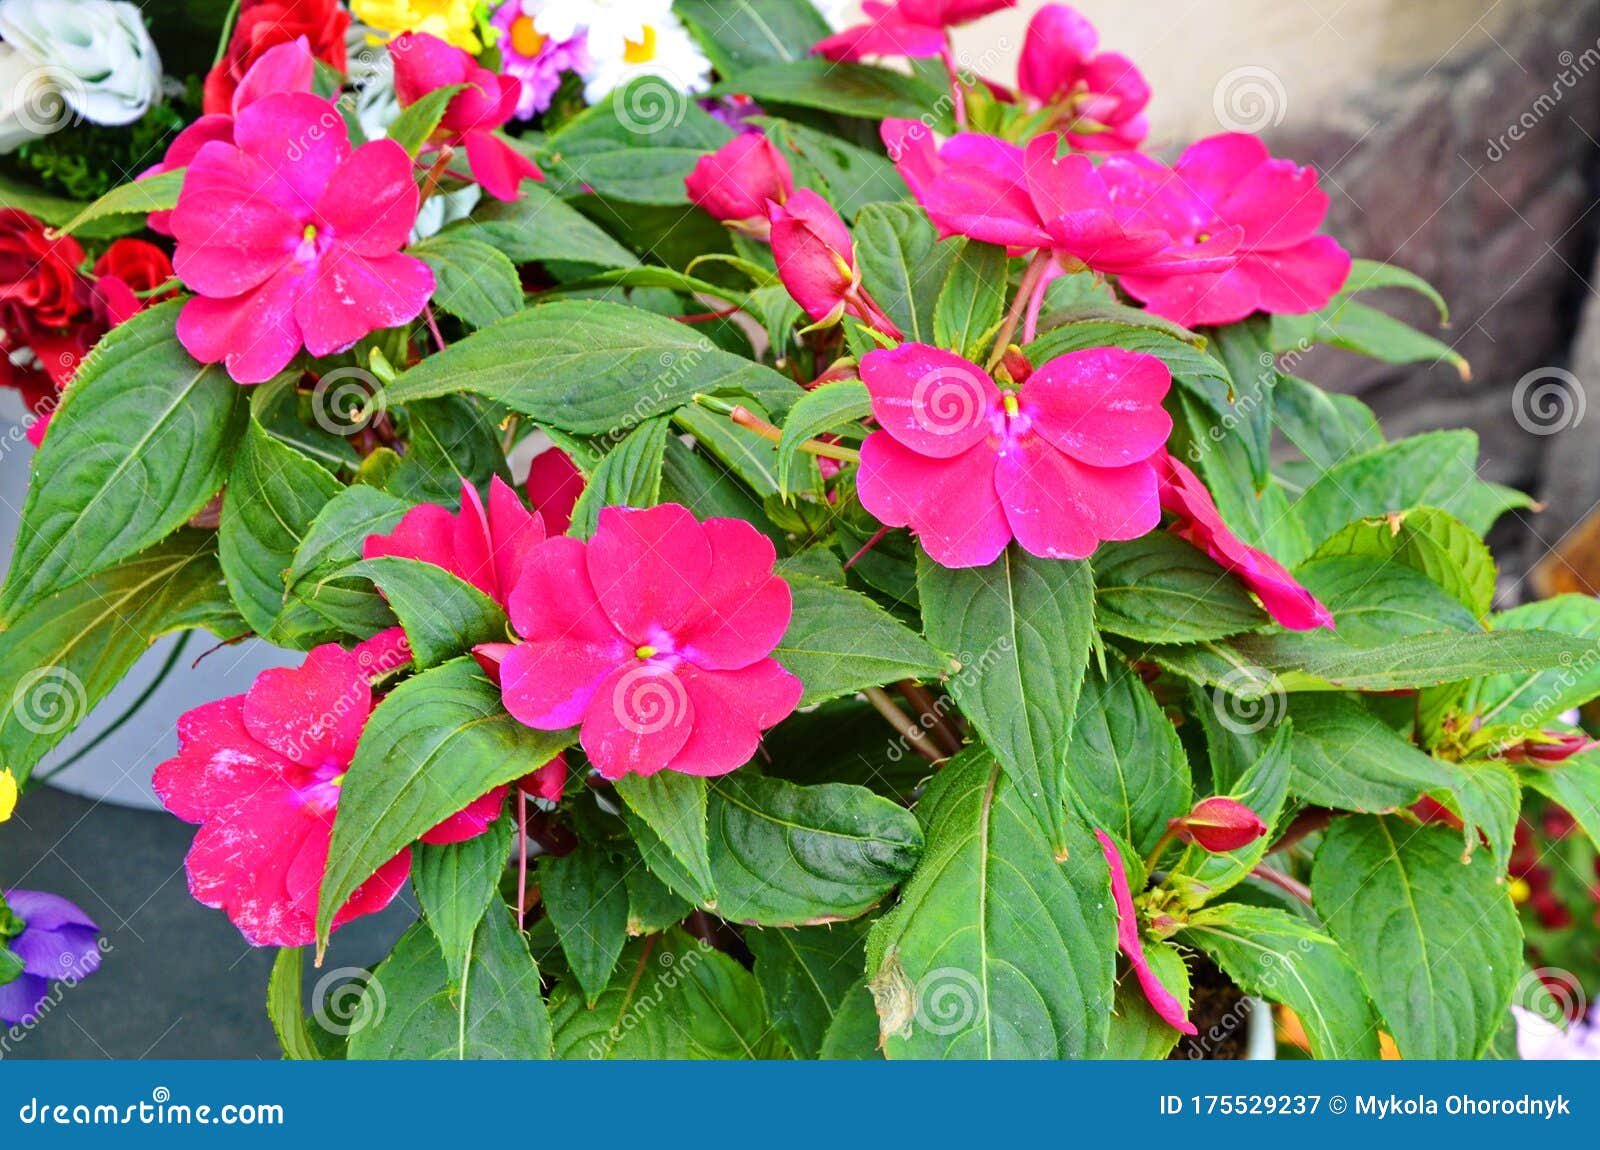 Impatiens Flowers On Flower Bed In The Garden Stock Image Image Of Environment Decorative 175529237